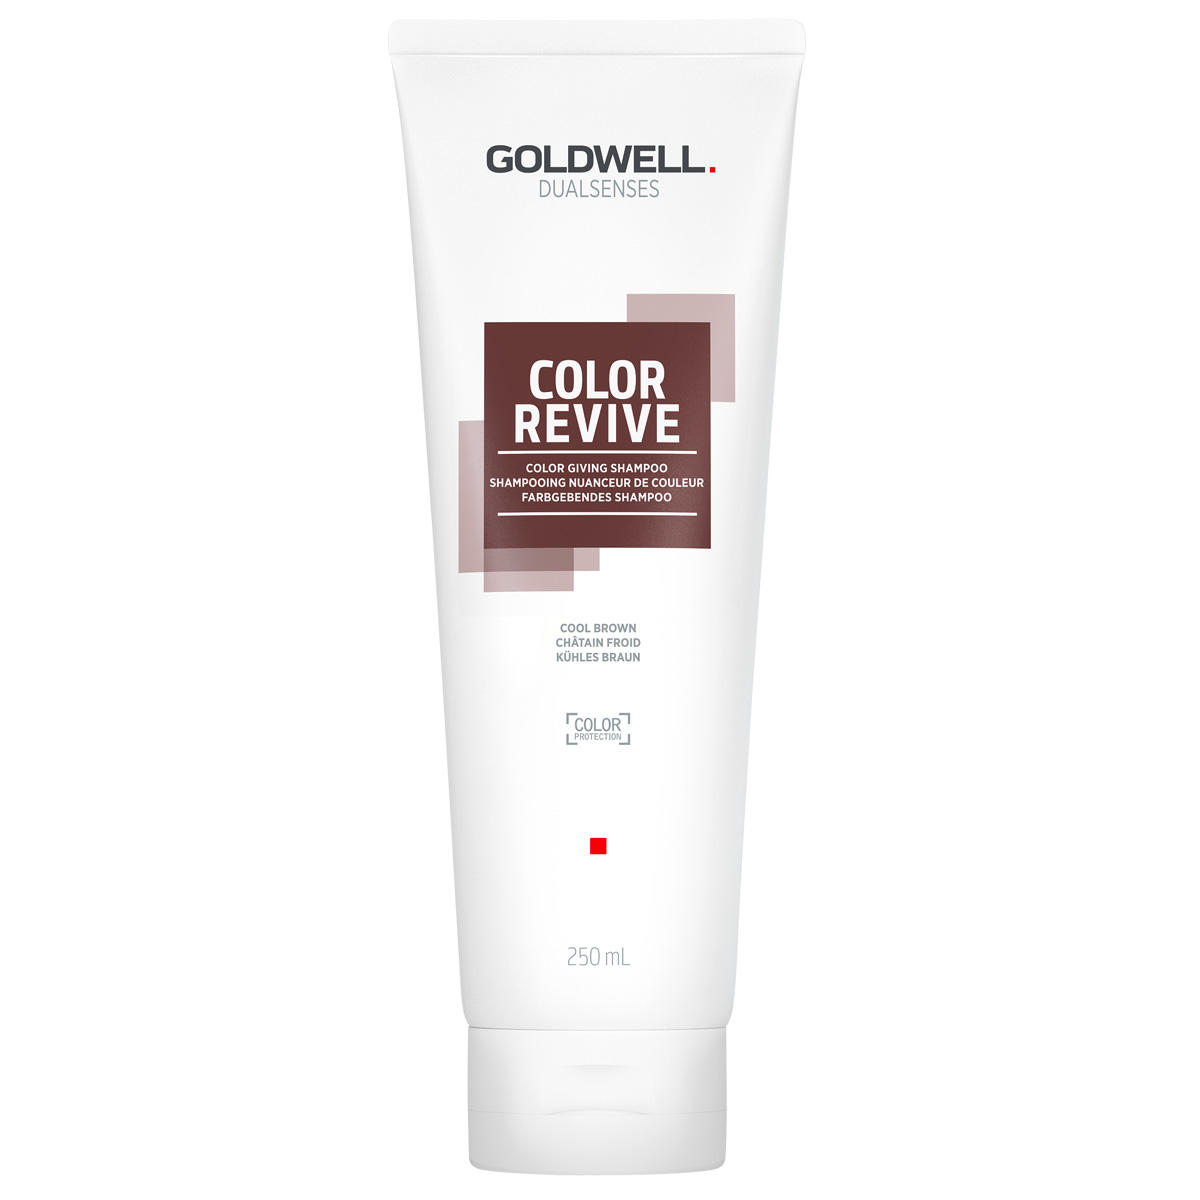 Goldwell Dualsenses Color Revive Shampooing colorant Brun froid 250 ml - 1